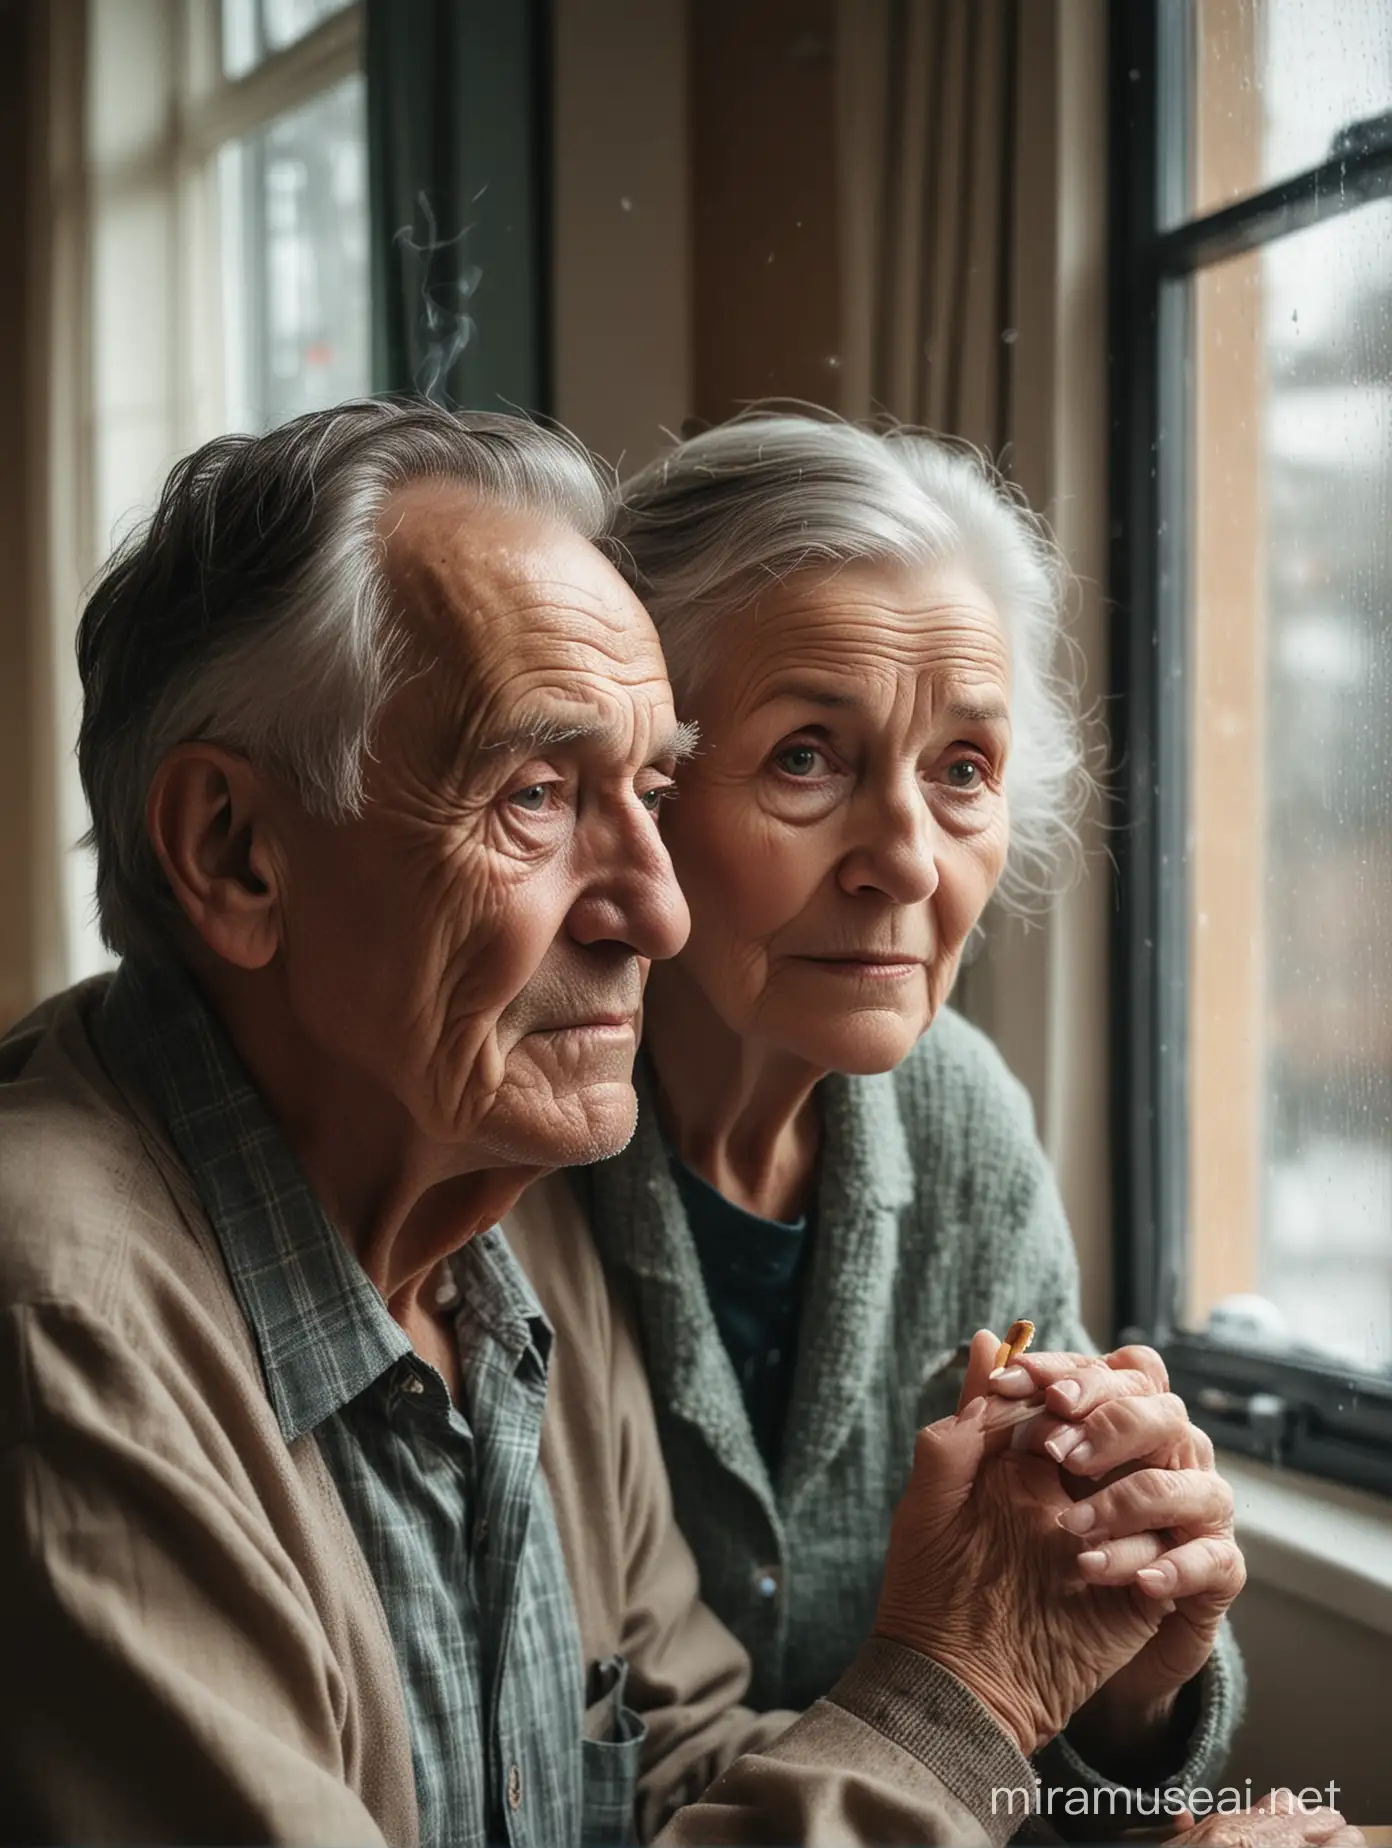 Photo of an old man and an old woman in love in a nursing home on a rainy day by the window. Smoking a cigarette with teary eyes
